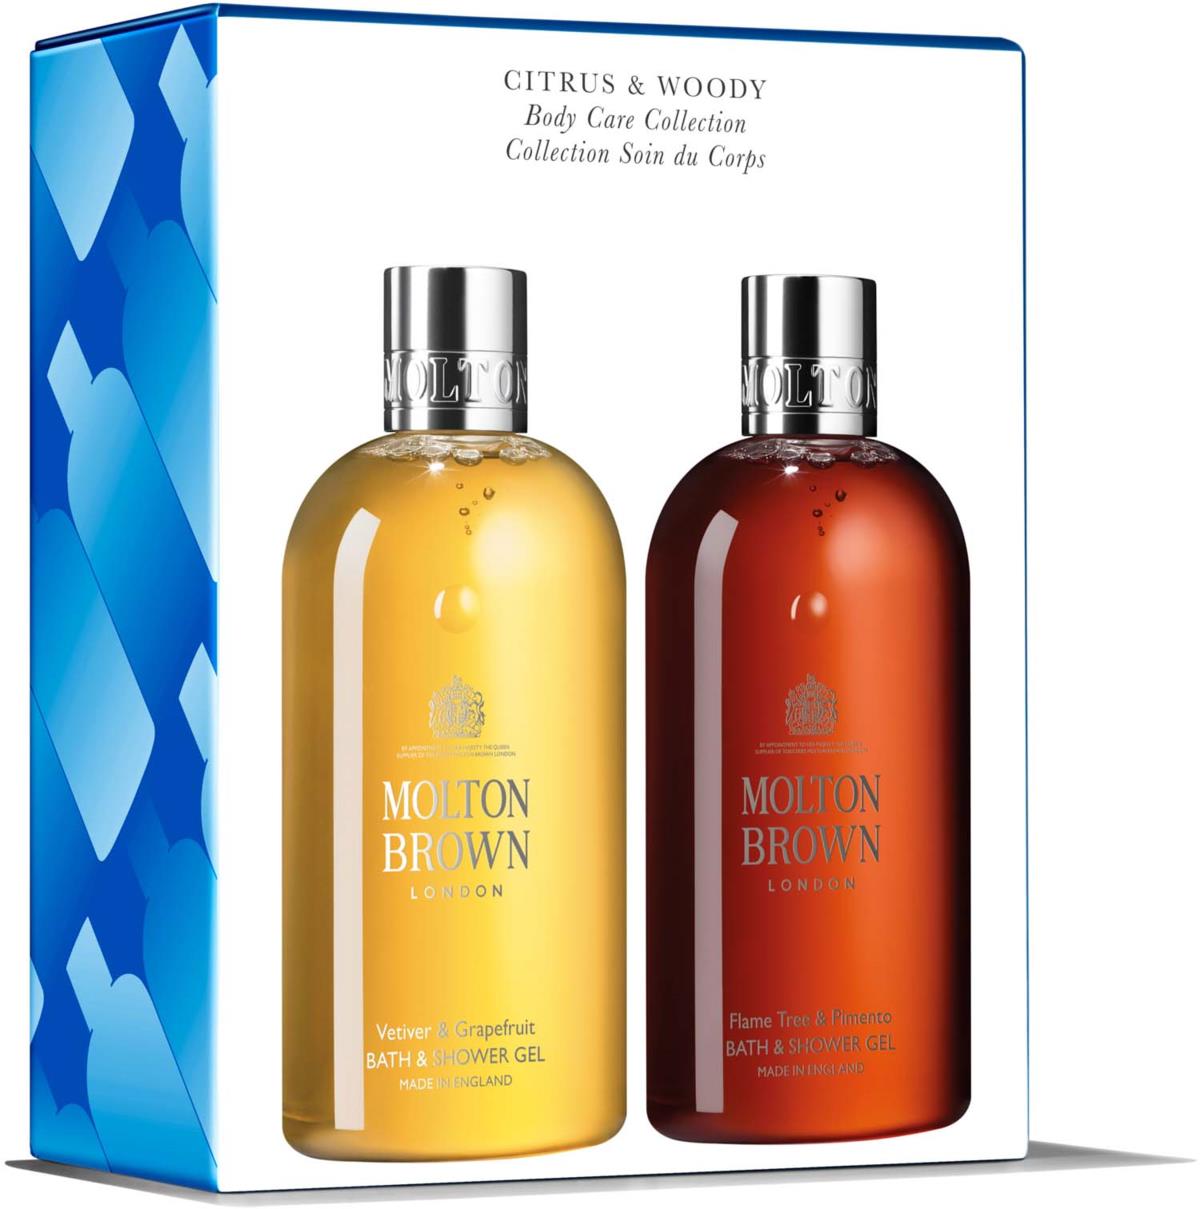 Molton Brown CITRUS & WOODY Body Care Collection | lyko.com